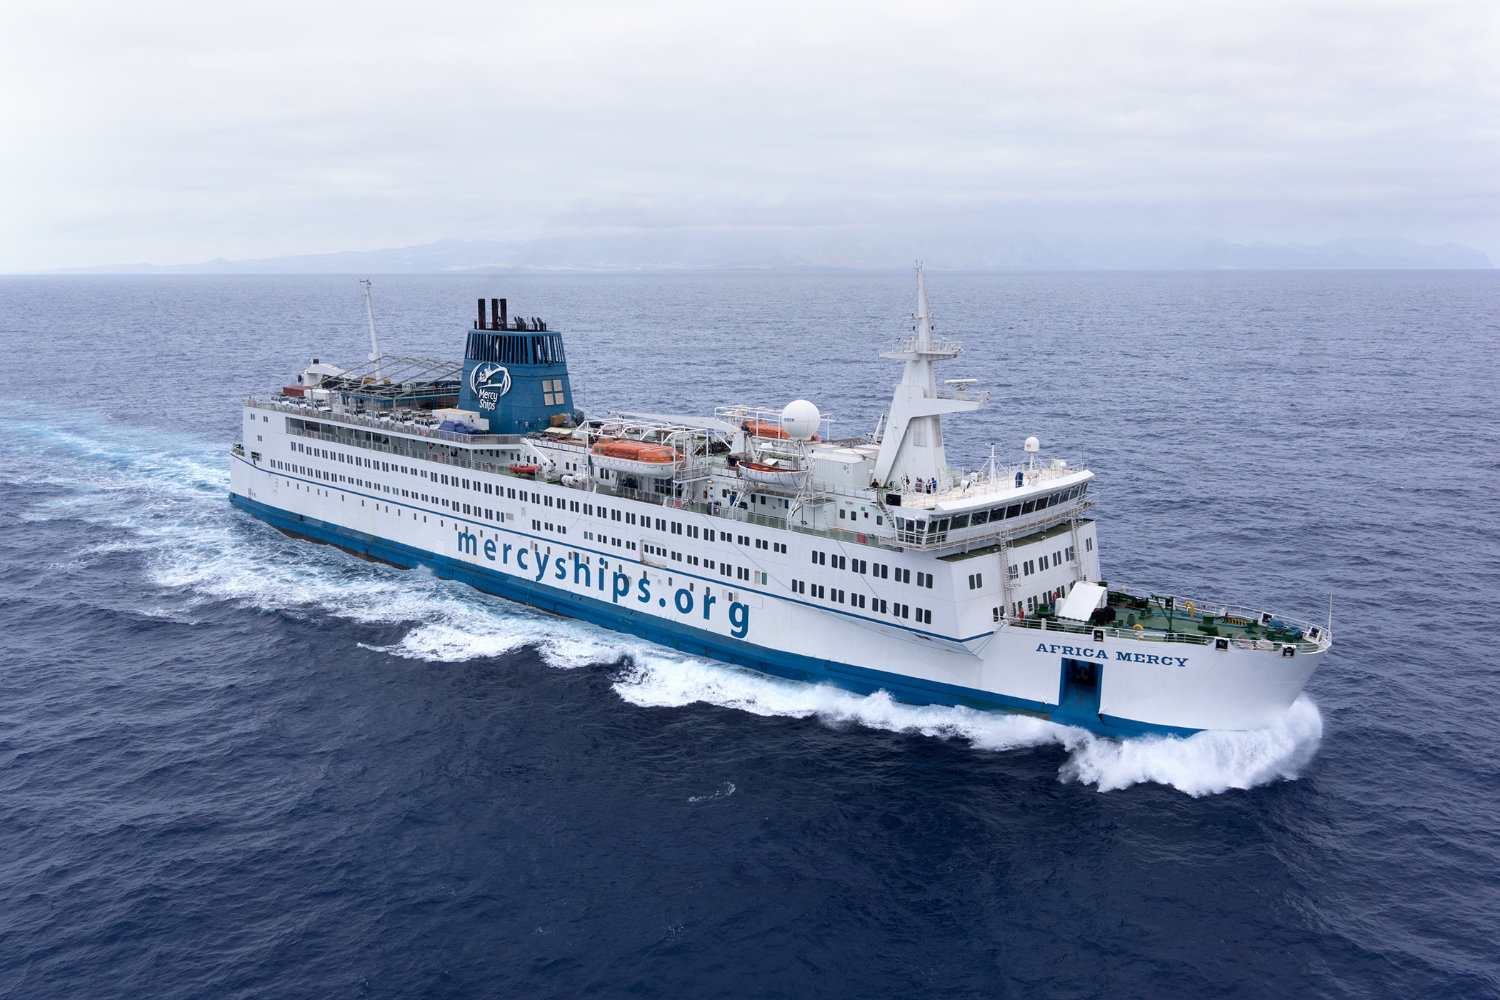 The Africa Mercy is the latest ocean-going hospital ship for Mercy Ships, headquartered south of Garden Valley. It will soon have a fully customized sister ship.